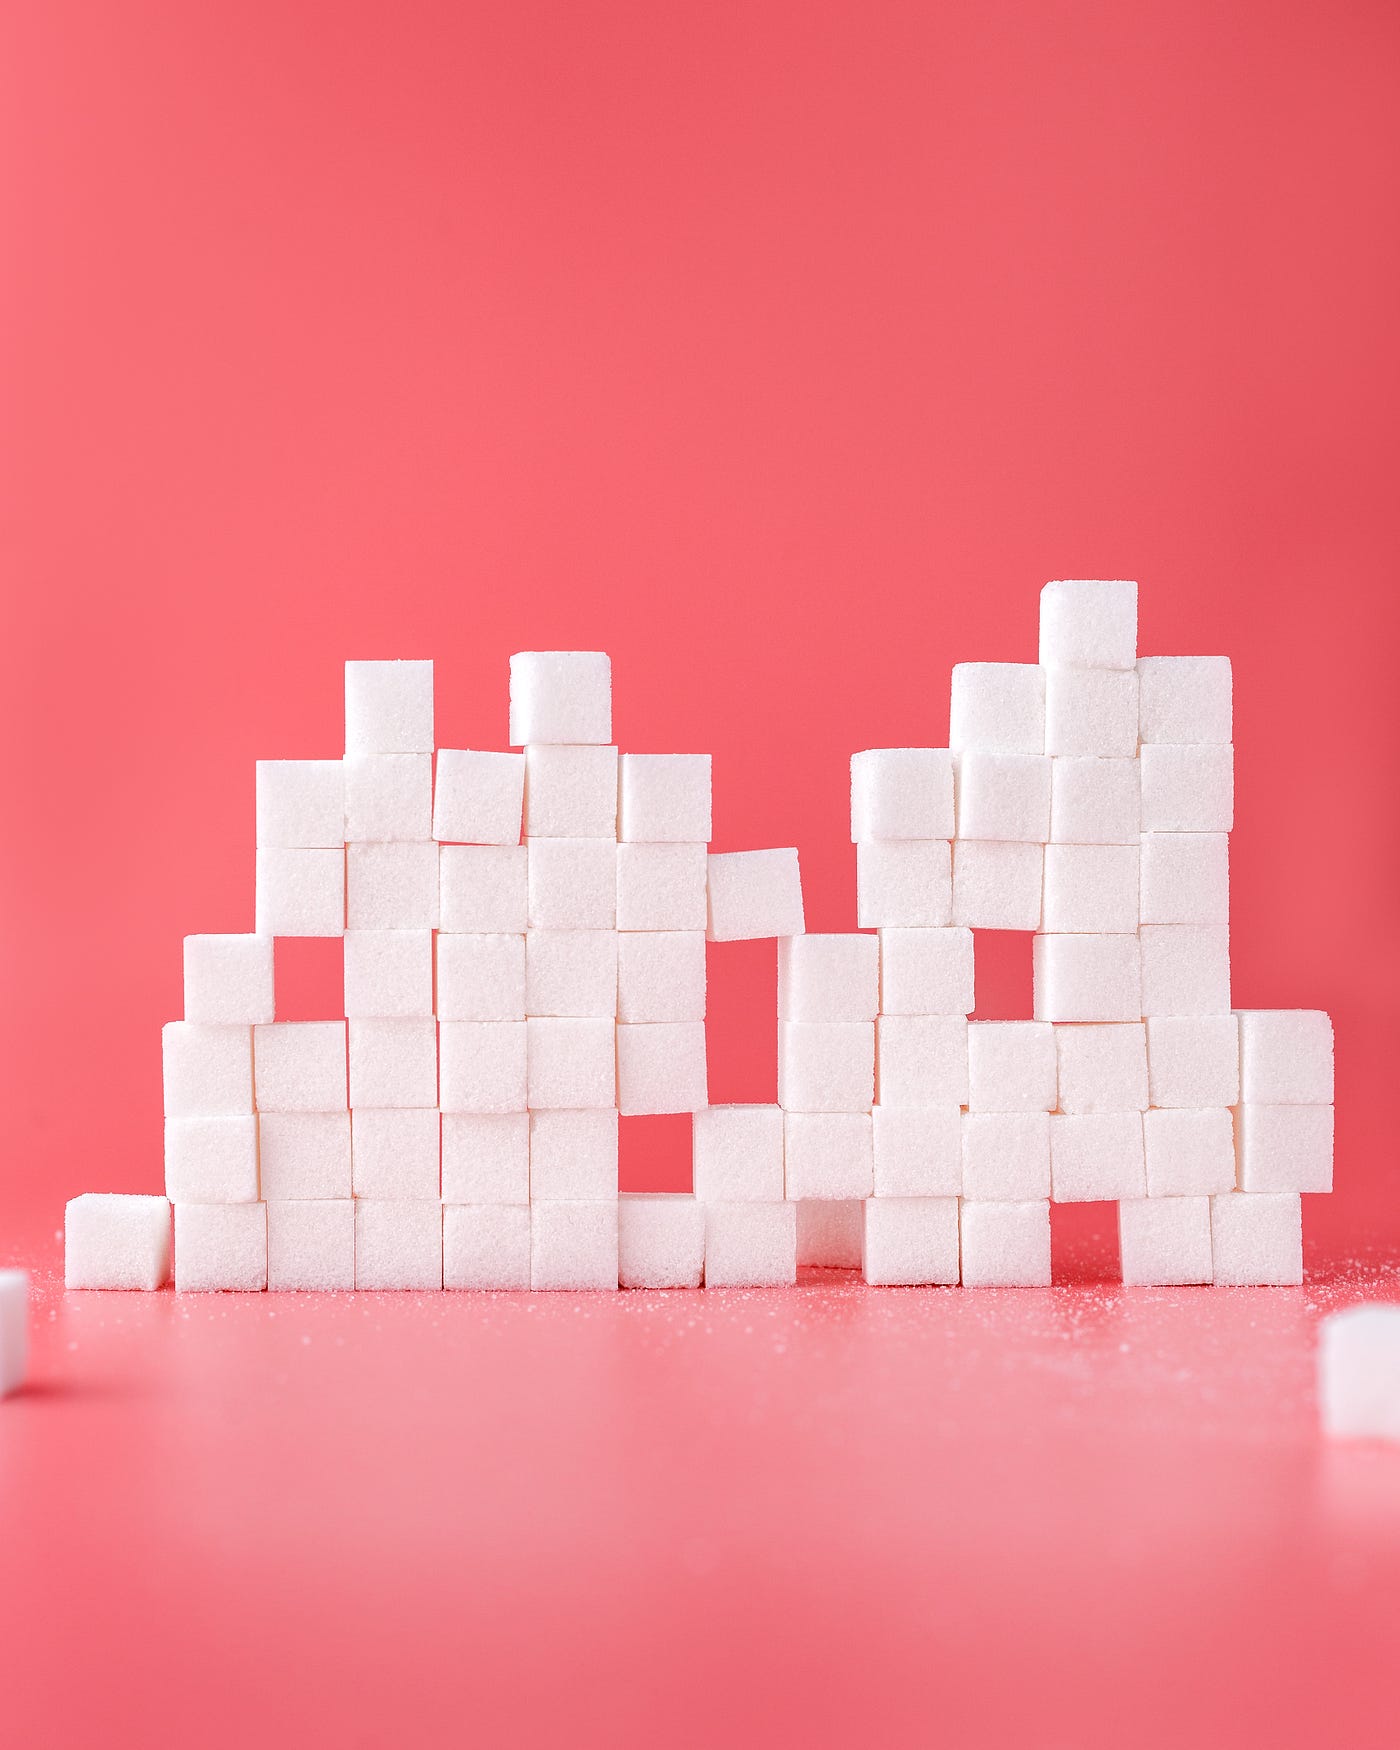 A stack of sugar cubes, numbering about 15 from left to right and seven cubes high. There are missing cubes in several locations. Pinkish background.